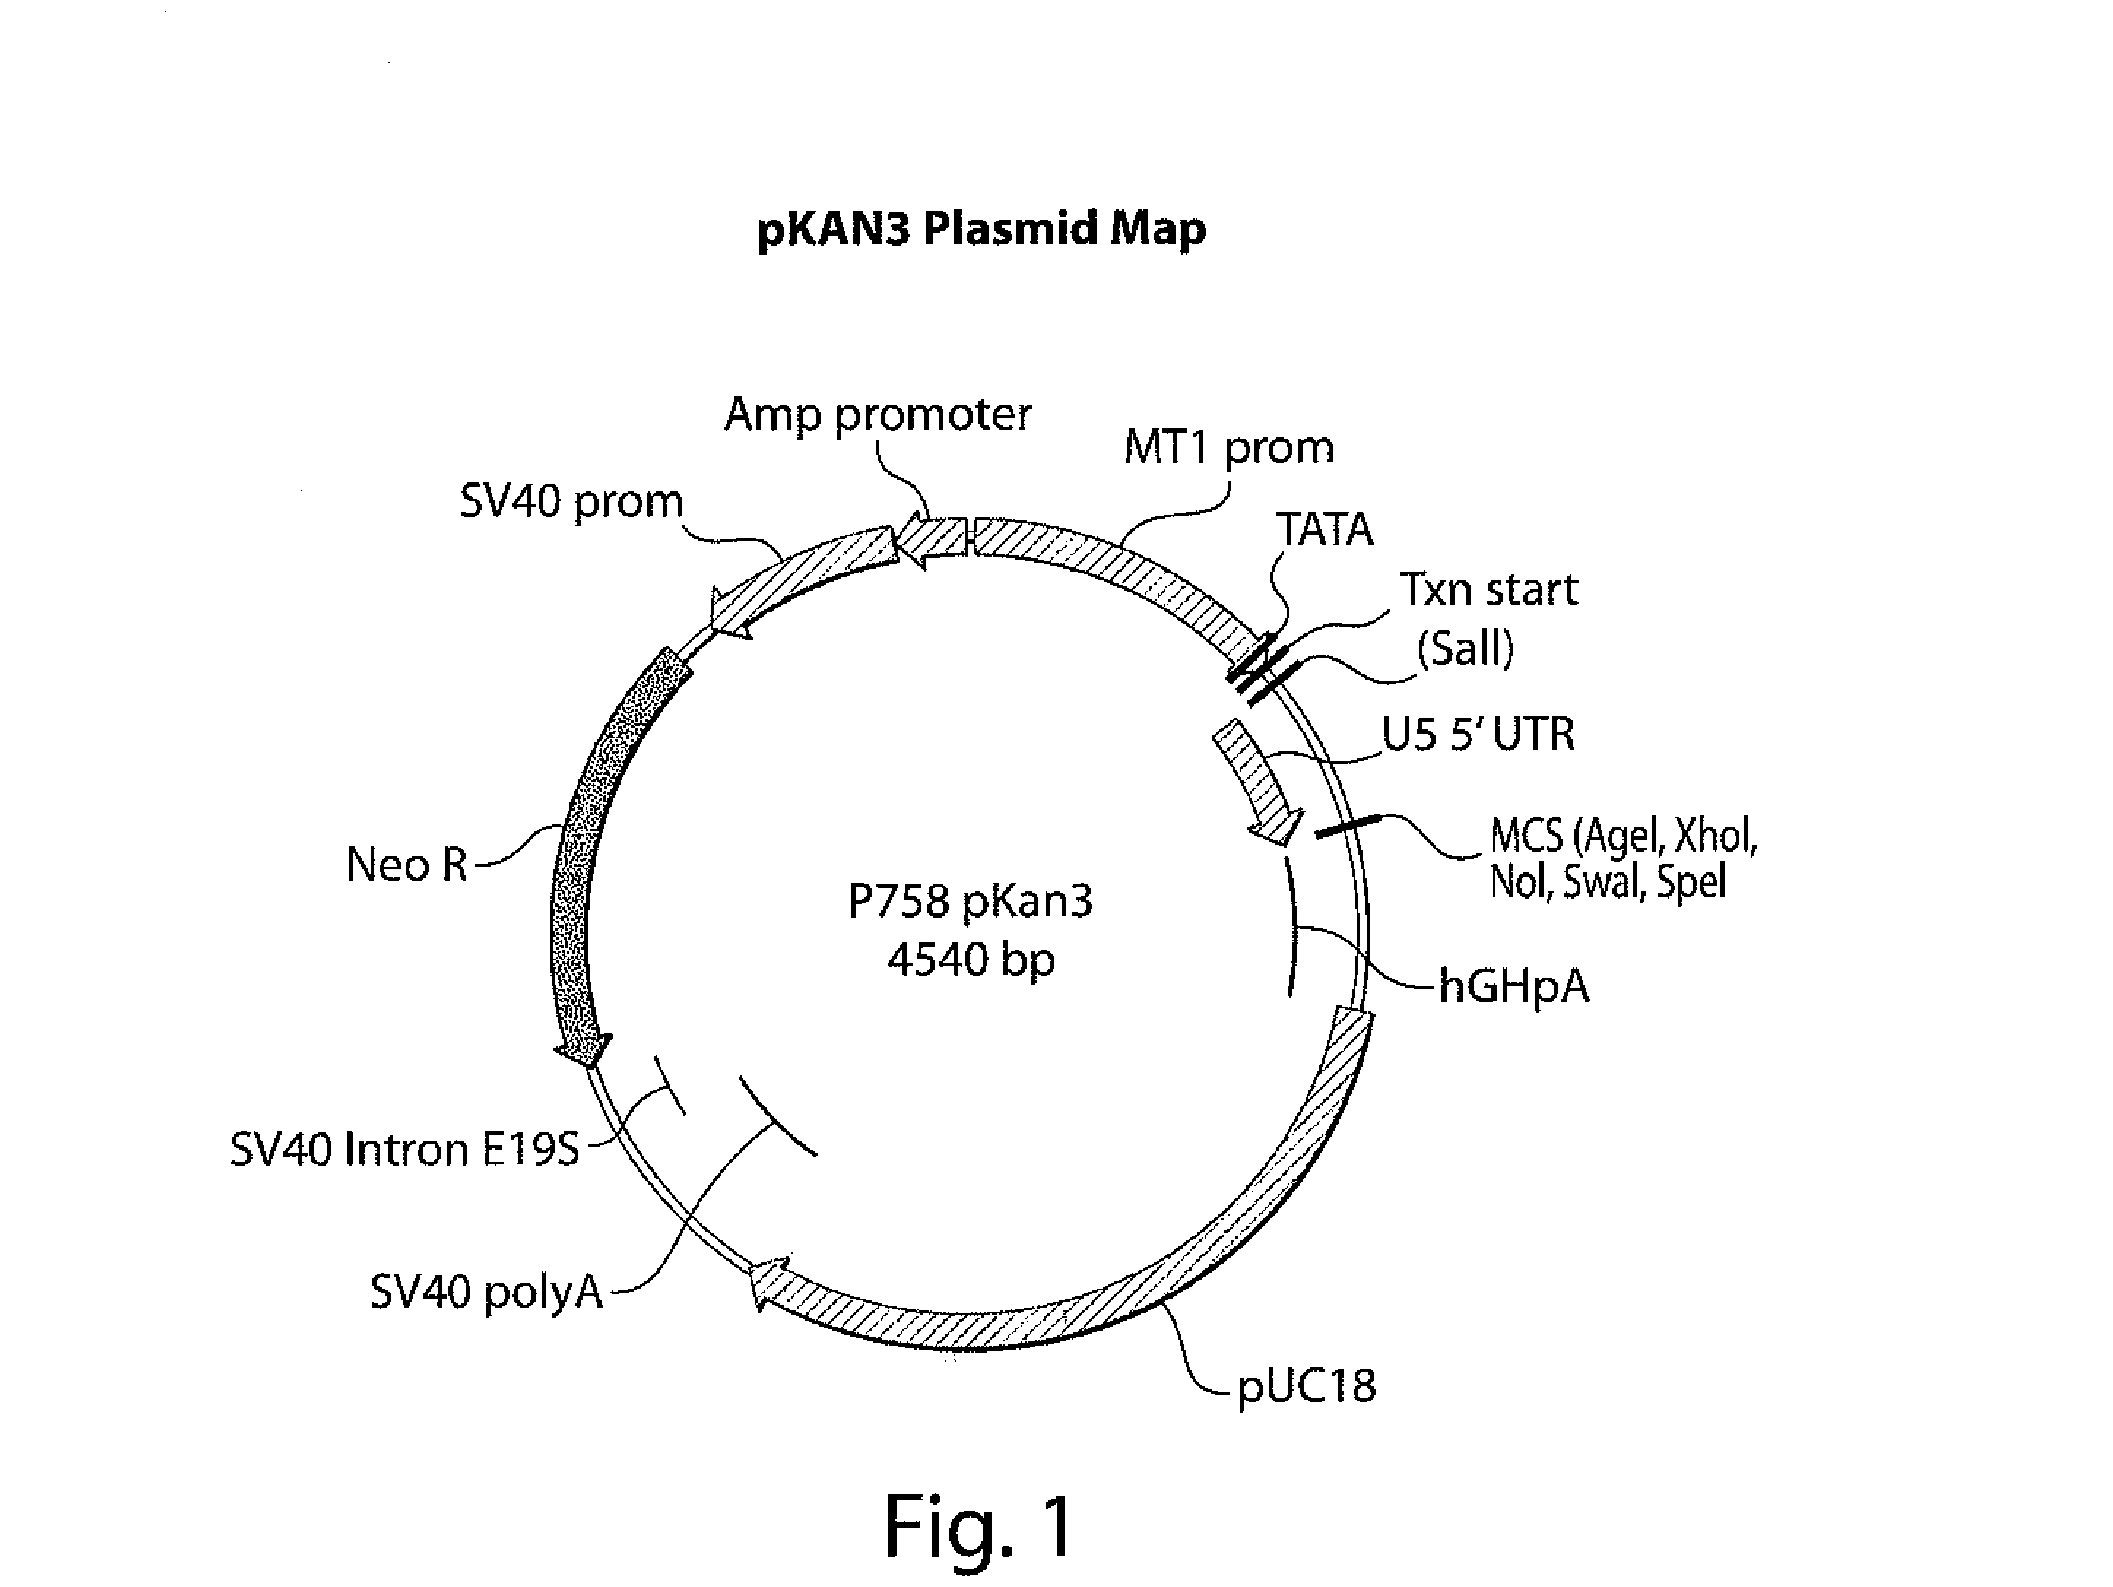 Cell Lines That Produce Prostaglandin F2 Alpha (PGF2A) And Uses Thereof